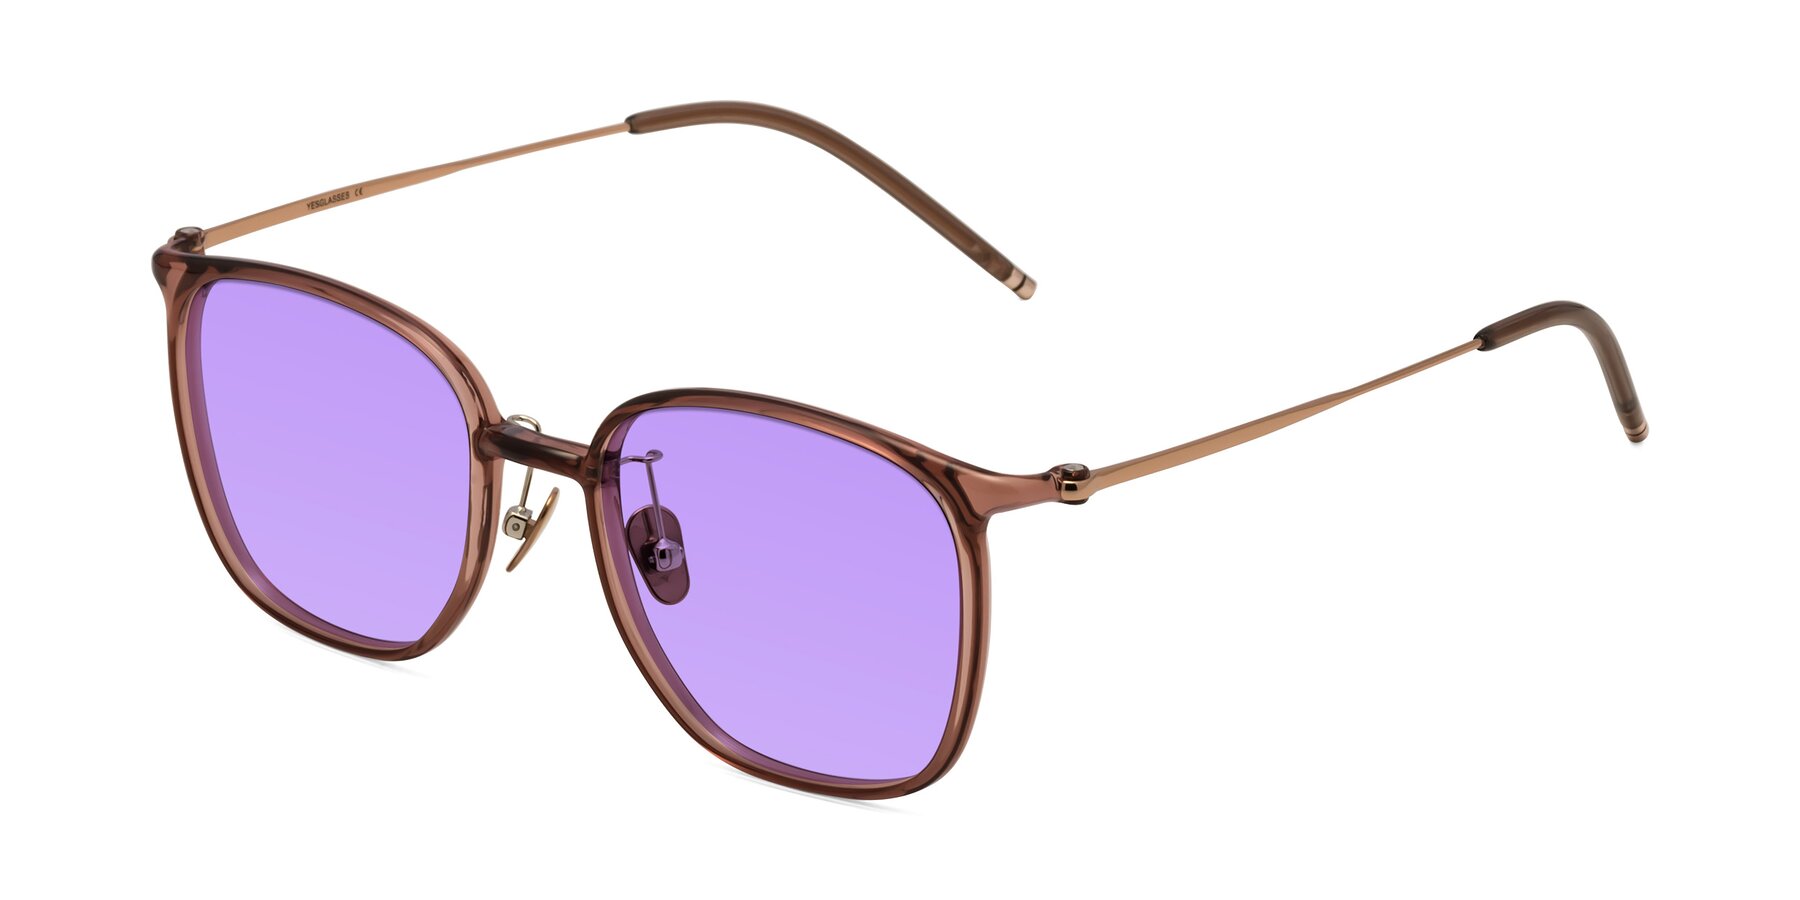 Angle of Manlius in Redwood with Medium Purple Tinted Lenses